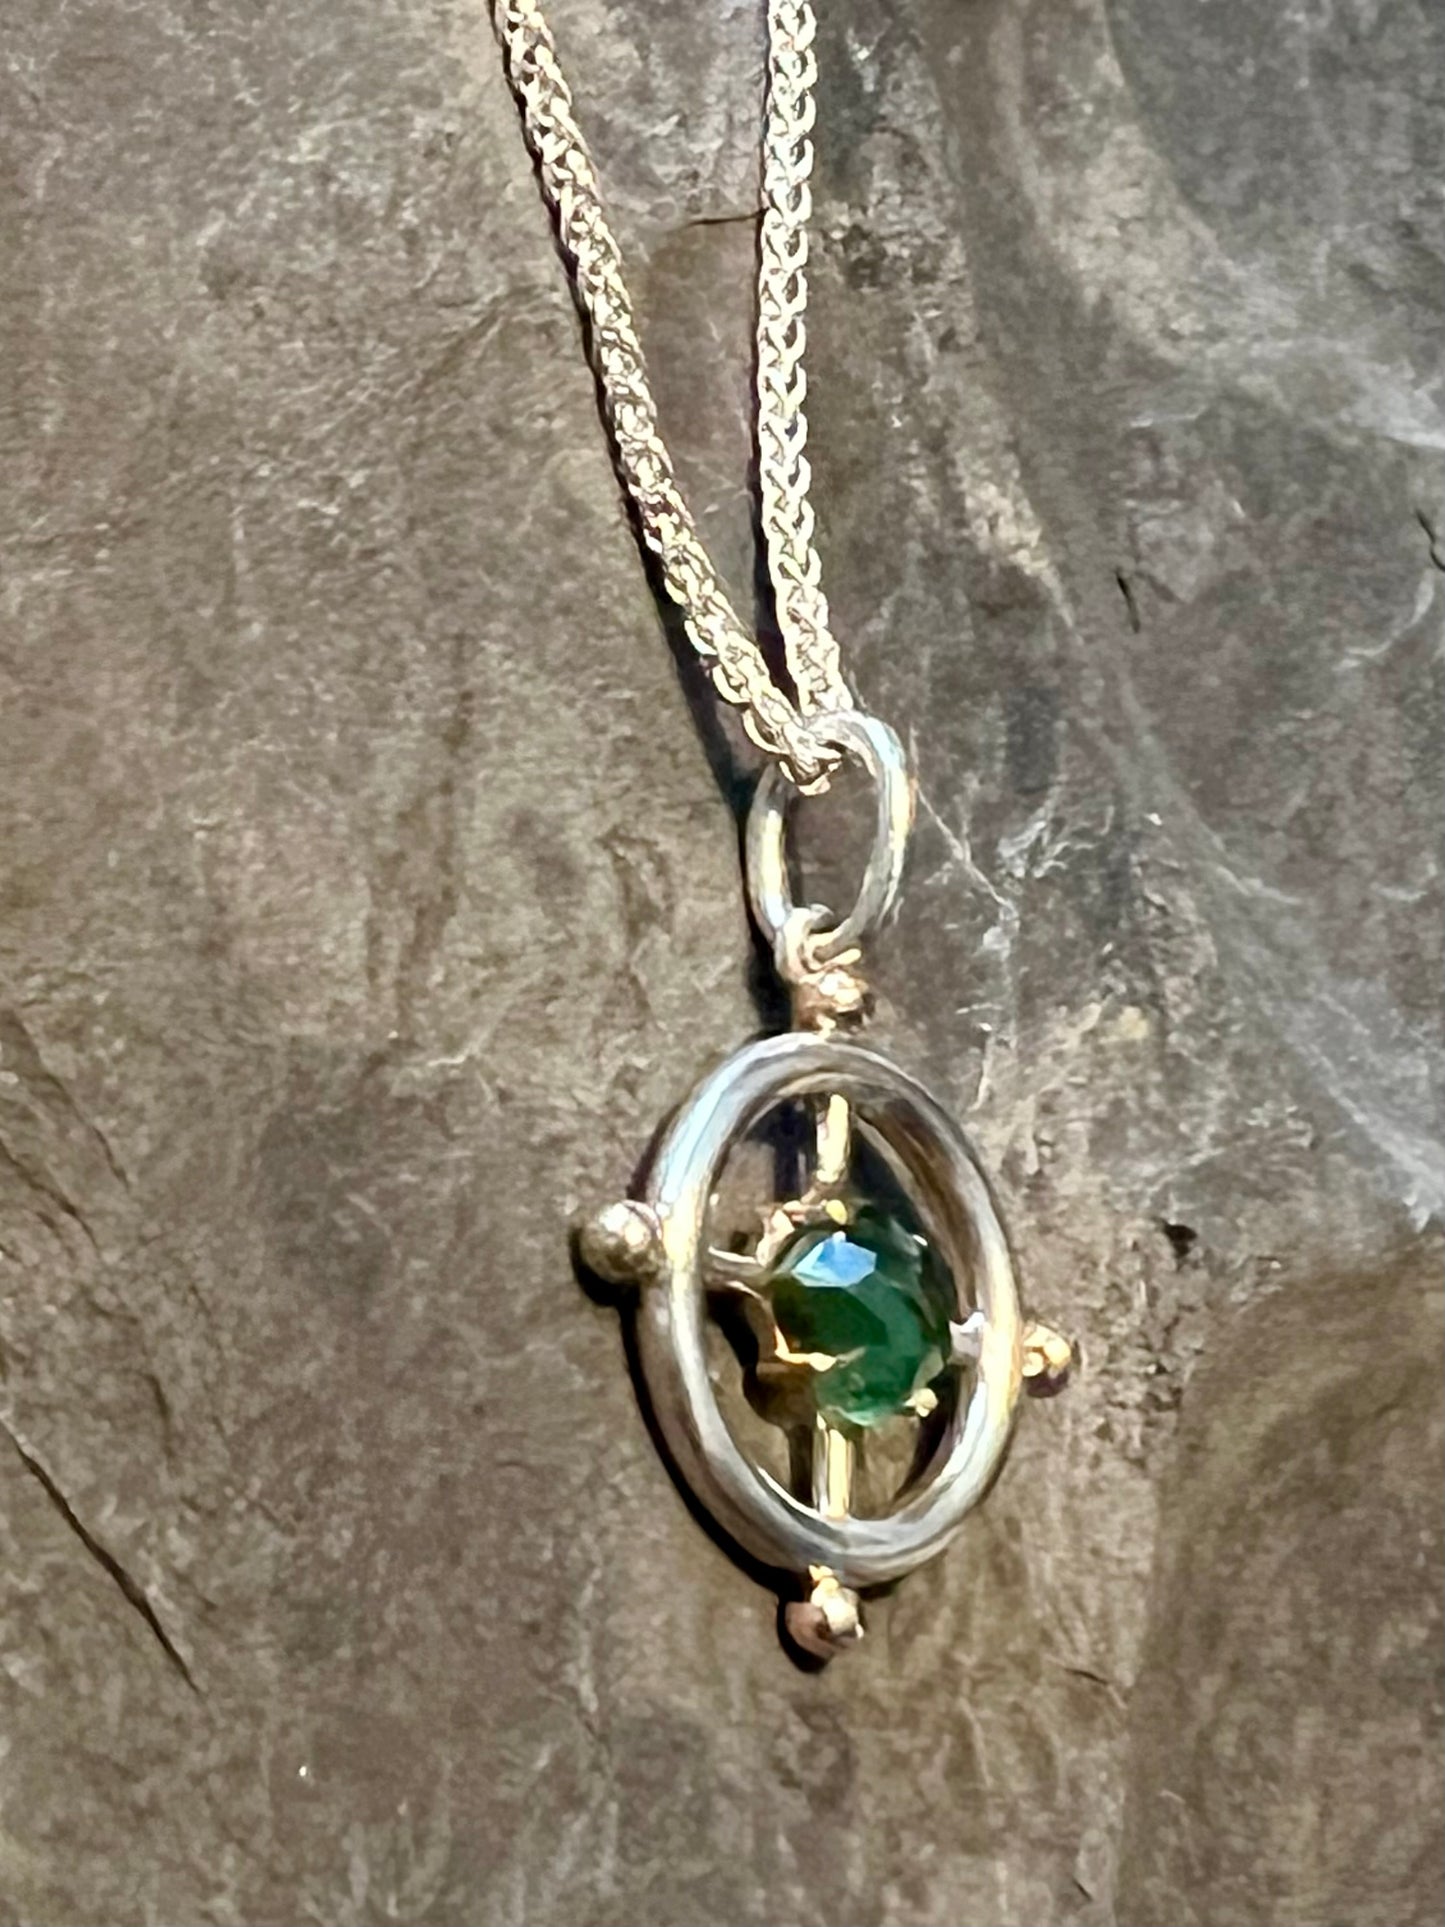 True North Green Tourmaline Pendant - One of a Kind Necklace